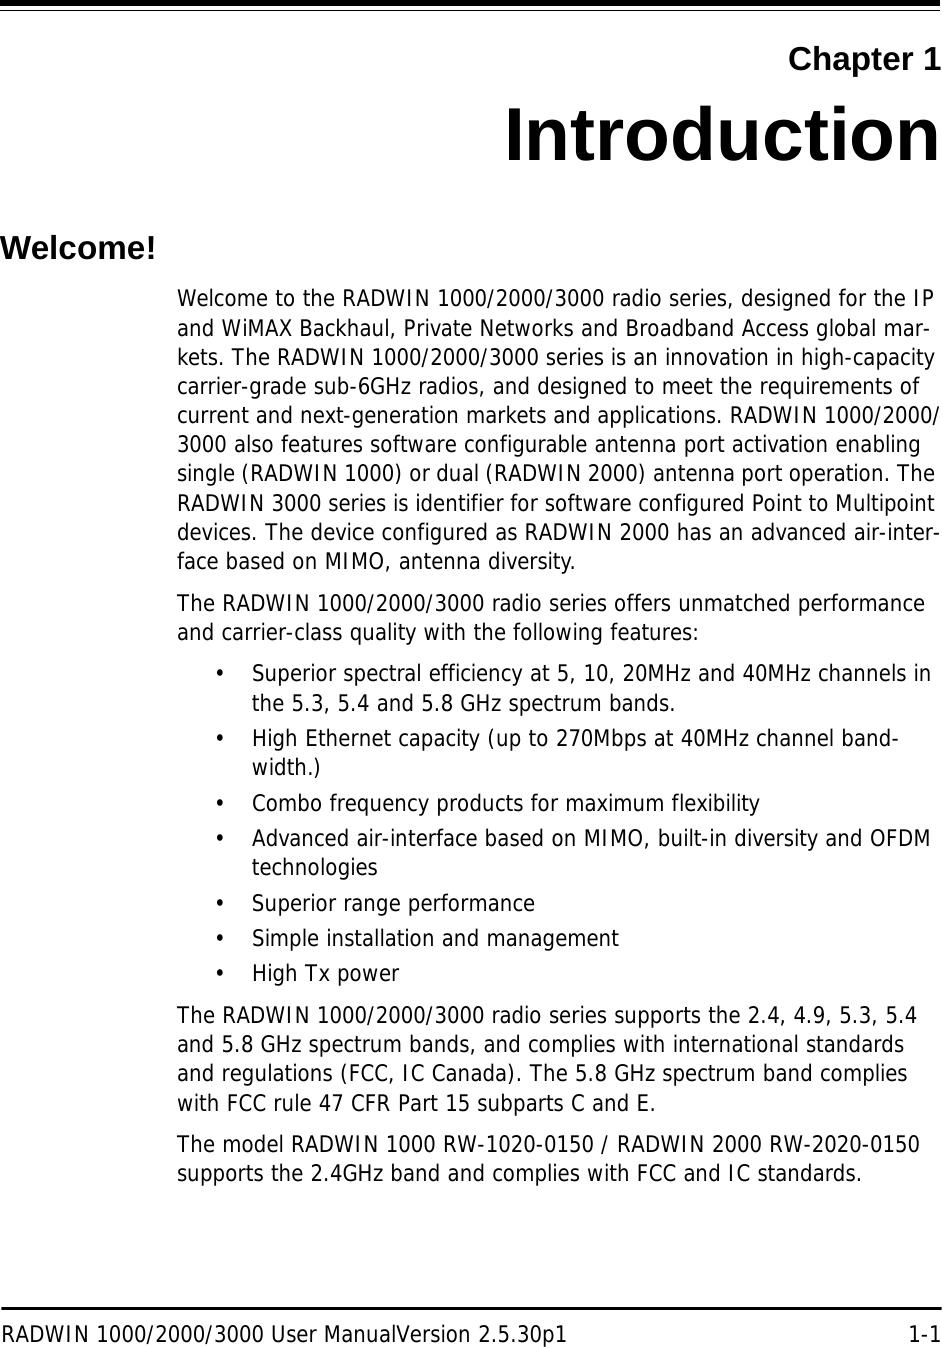 RADWIN 1000/2000/3000 User ManualVersion 2.5.30p1 1-1Chapter 1IntroductionWelcome!Welcome to the RADWIN 1000/2000/3000 radio series, designed for the IP and WiMAX Backhaul, Private Networks and Broadband Access global mar-kets. The RADWIN 1000/2000/3000 series is an innovation in high-capacity carrier-grade sub-6GHz radios, and designed to meet the requirements of current and next-generation markets and applications. RADWIN 1000/2000/3000 also features software configurable antenna port activation enabling single (RADWIN 1000) or dual (RADWIN 2000) antenna port operation. The RADWIN 3000 series is identifier for software configured Point to Multipoint devices. The device configured as RADWIN 2000 has an advanced air-inter-face based on MIMO, antenna diversity.The RADWIN 1000/2000/3000 radio series offers unmatched performance and carrier-class quality with the following features:• Superior spectral efficiency at 5, 10, 20MHz and 40MHz channels in the 5.3, 5.4 and 5.8 GHz spectrum bands.• High Ethernet capacity (up to 270Mbps at 40MHz channel band-width.)• Combo frequency products for maximum flexibility • Advanced air-interface based on MIMO, built-in diversity and OFDM technologies• Superior range performance• Simple installation and management•High Tx powerThe RADWIN 1000/2000/3000 radio series supports the 2.4, 4.9, 5.3, 5.4 and 5.8 GHz spectrum bands, and complies with international standards and regulations (FCC, IC Canada). The 5.8 GHz spectrum band complies with FCC rule 47 CFR Part 15 subparts C and E.The model RADWIN 1000 RW-1020-0150 / RADWIN 2000 RW-2020-0150 supports the 2.4GHz band and complies with FCC and IC standards.